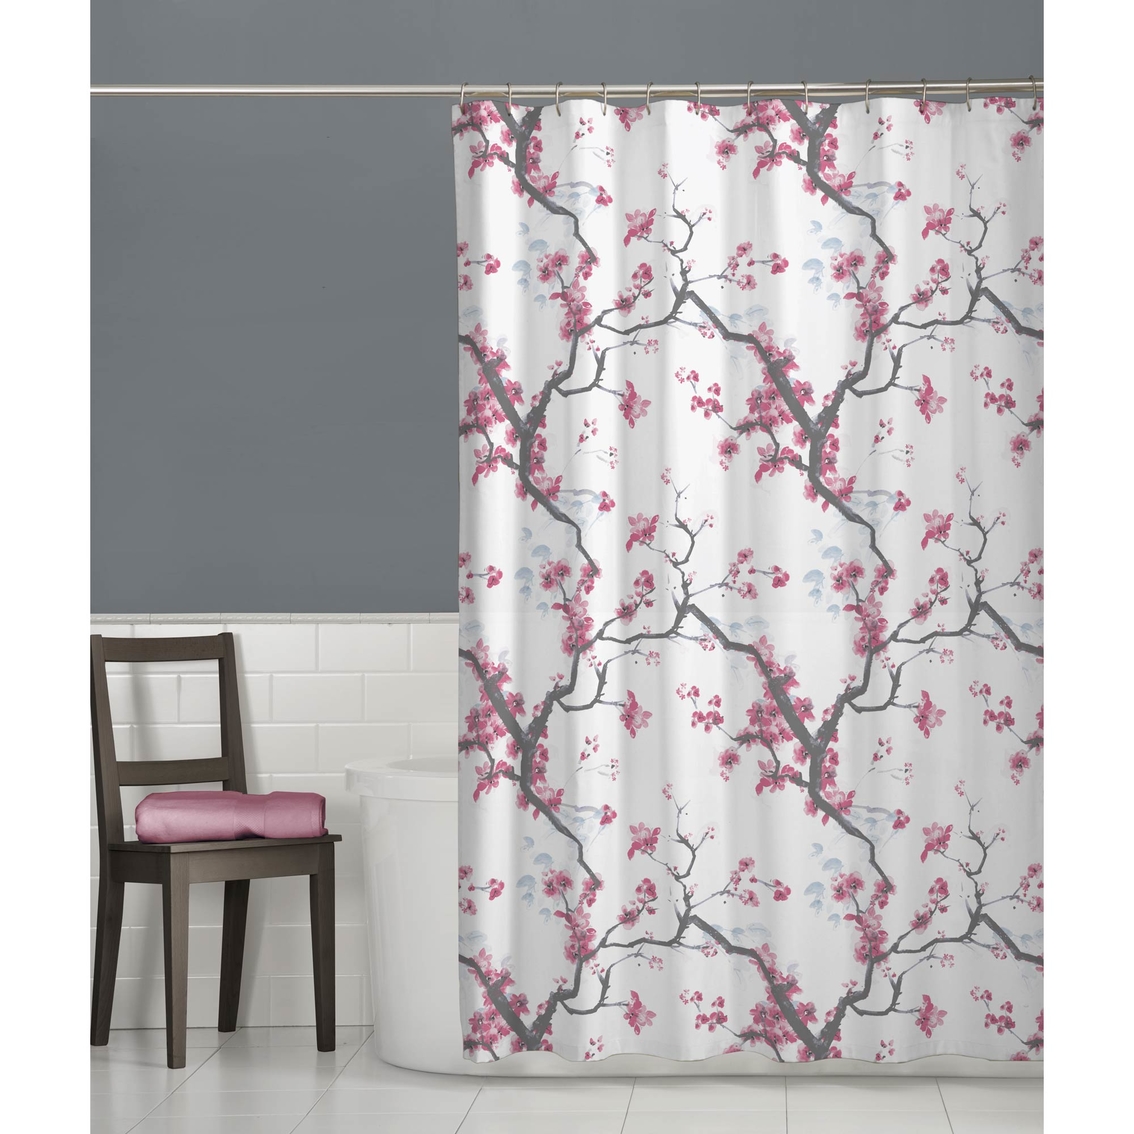 Maytex Cherrywood Blossom Fabric Shower Curtain 70 x 72 in. - Image 2 of 5